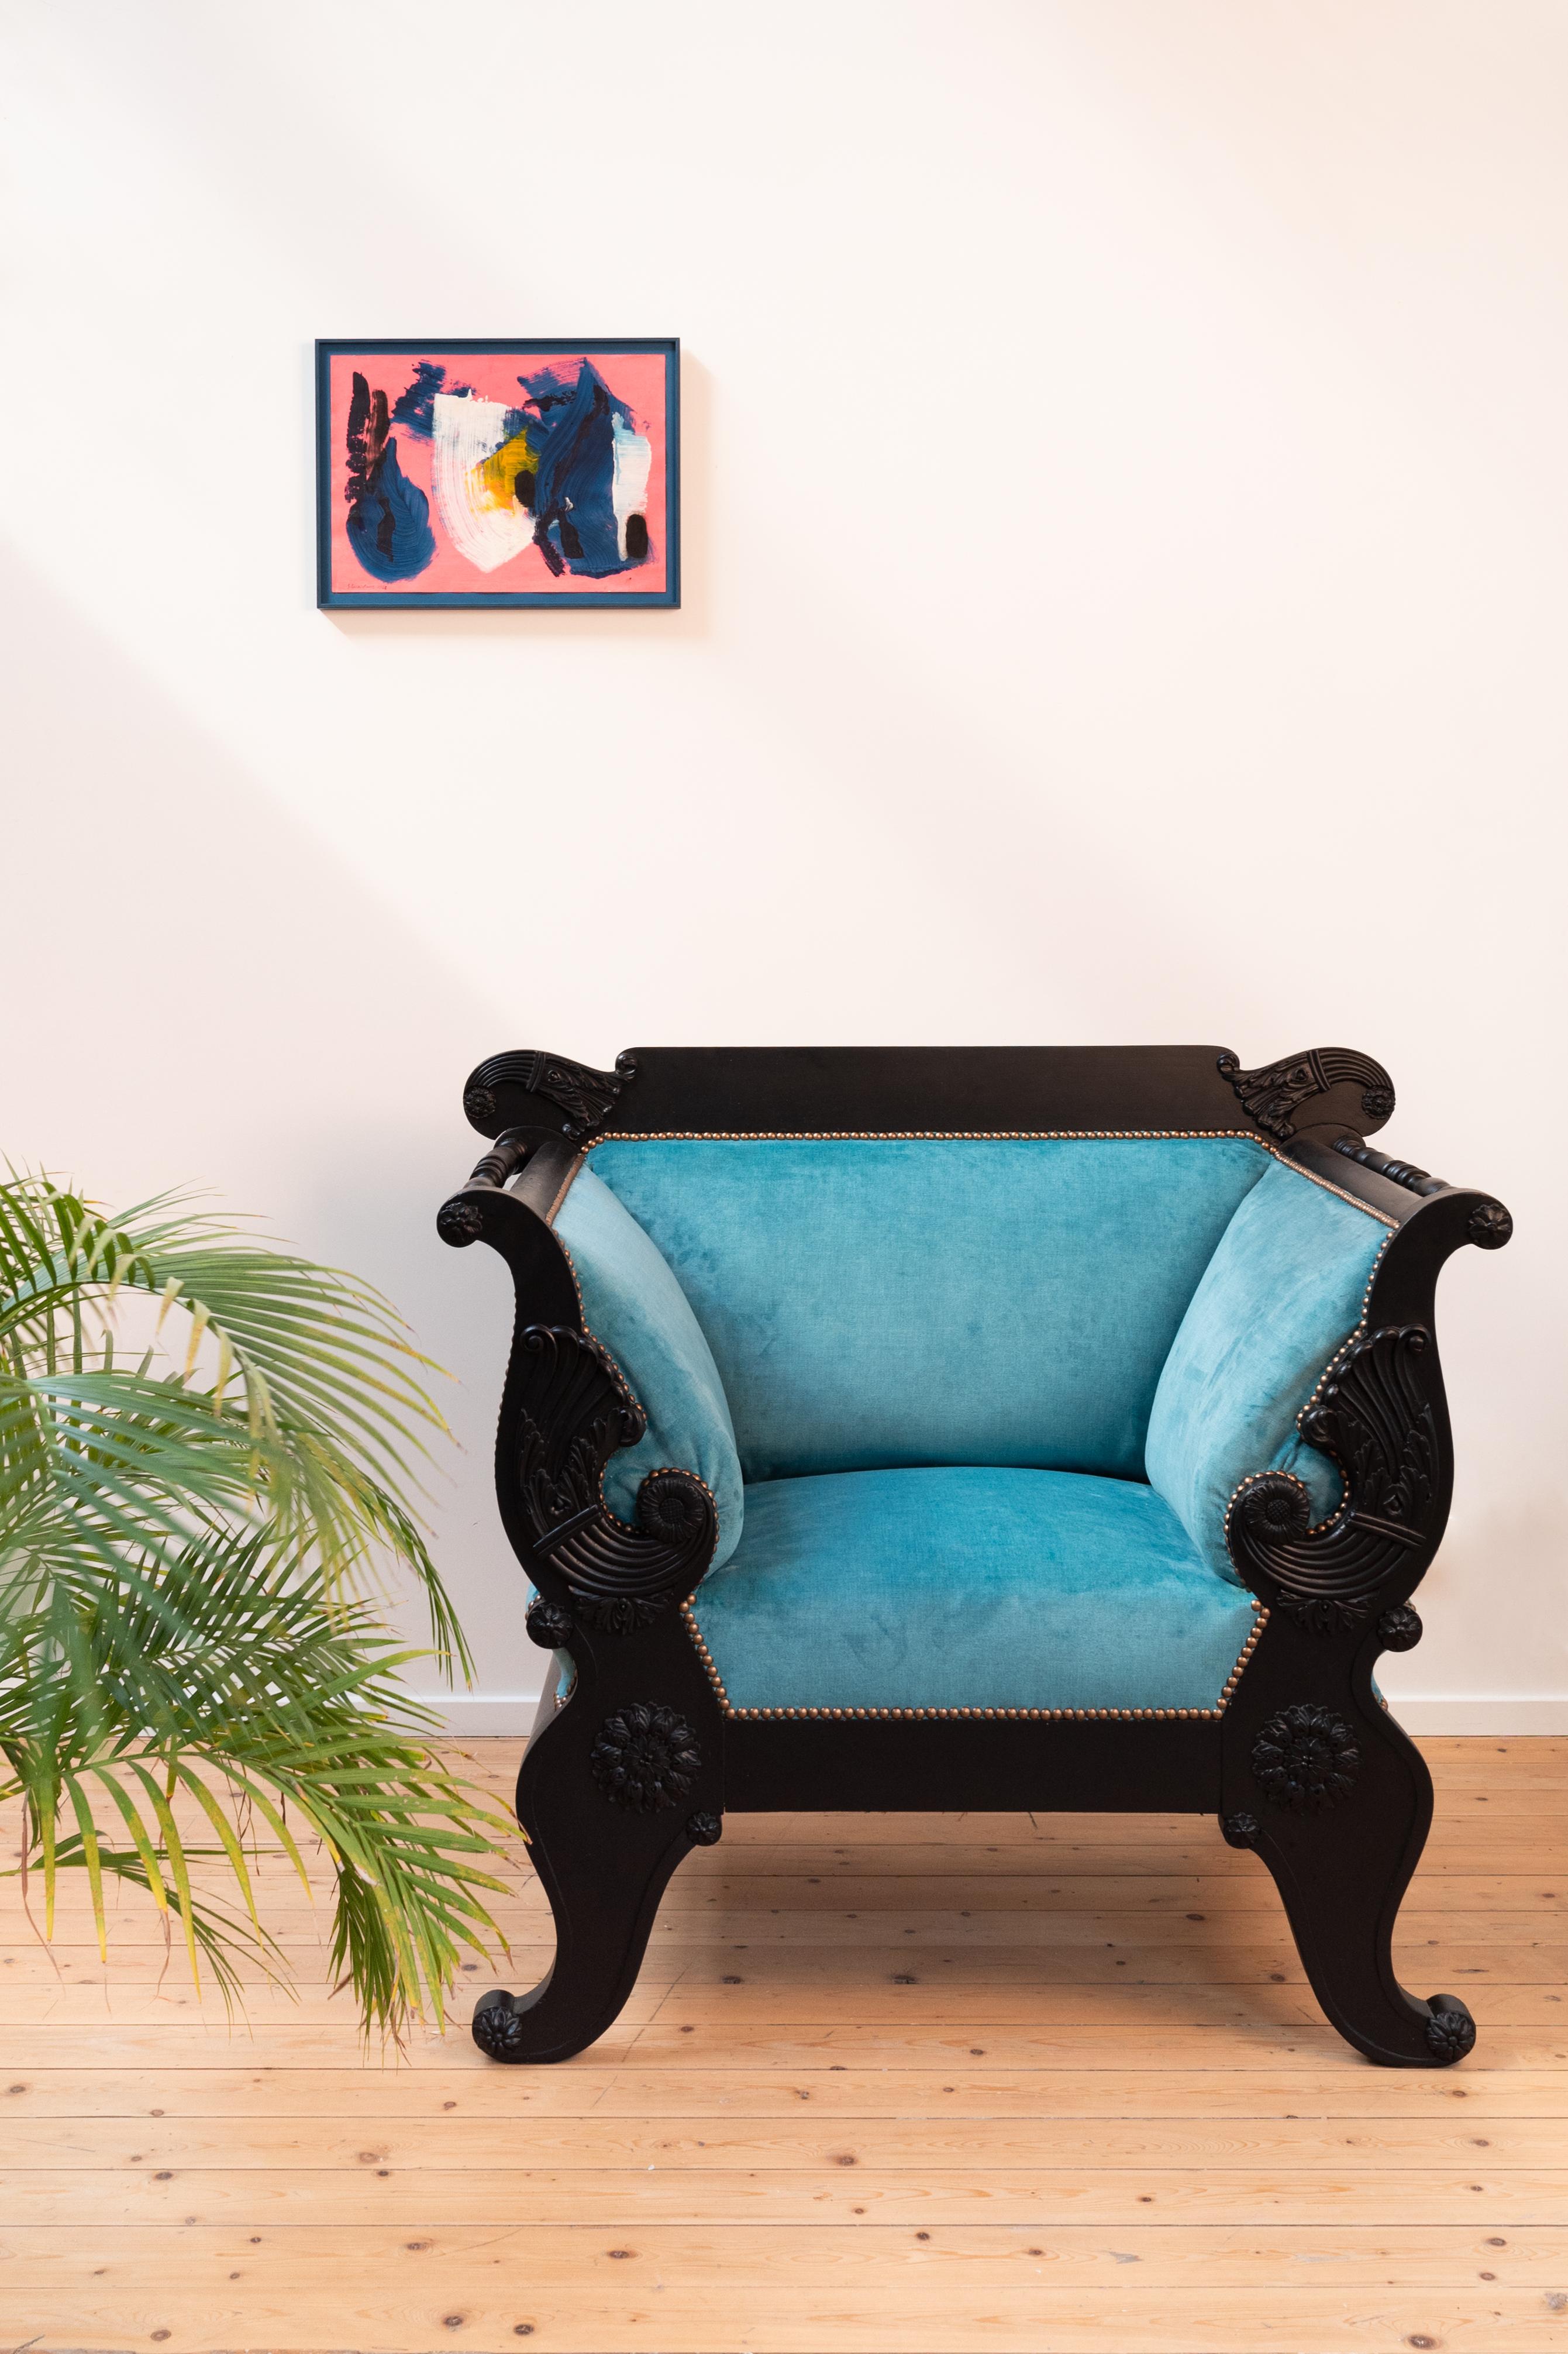 Original massive Biedermeier chair, which was painted black and given a new blue velours upholstery to give it a modern look. 

The fabric used is knitted velours, called Moss 33 (by Keymer). Knitted velours implies that the fabric has a rich colour